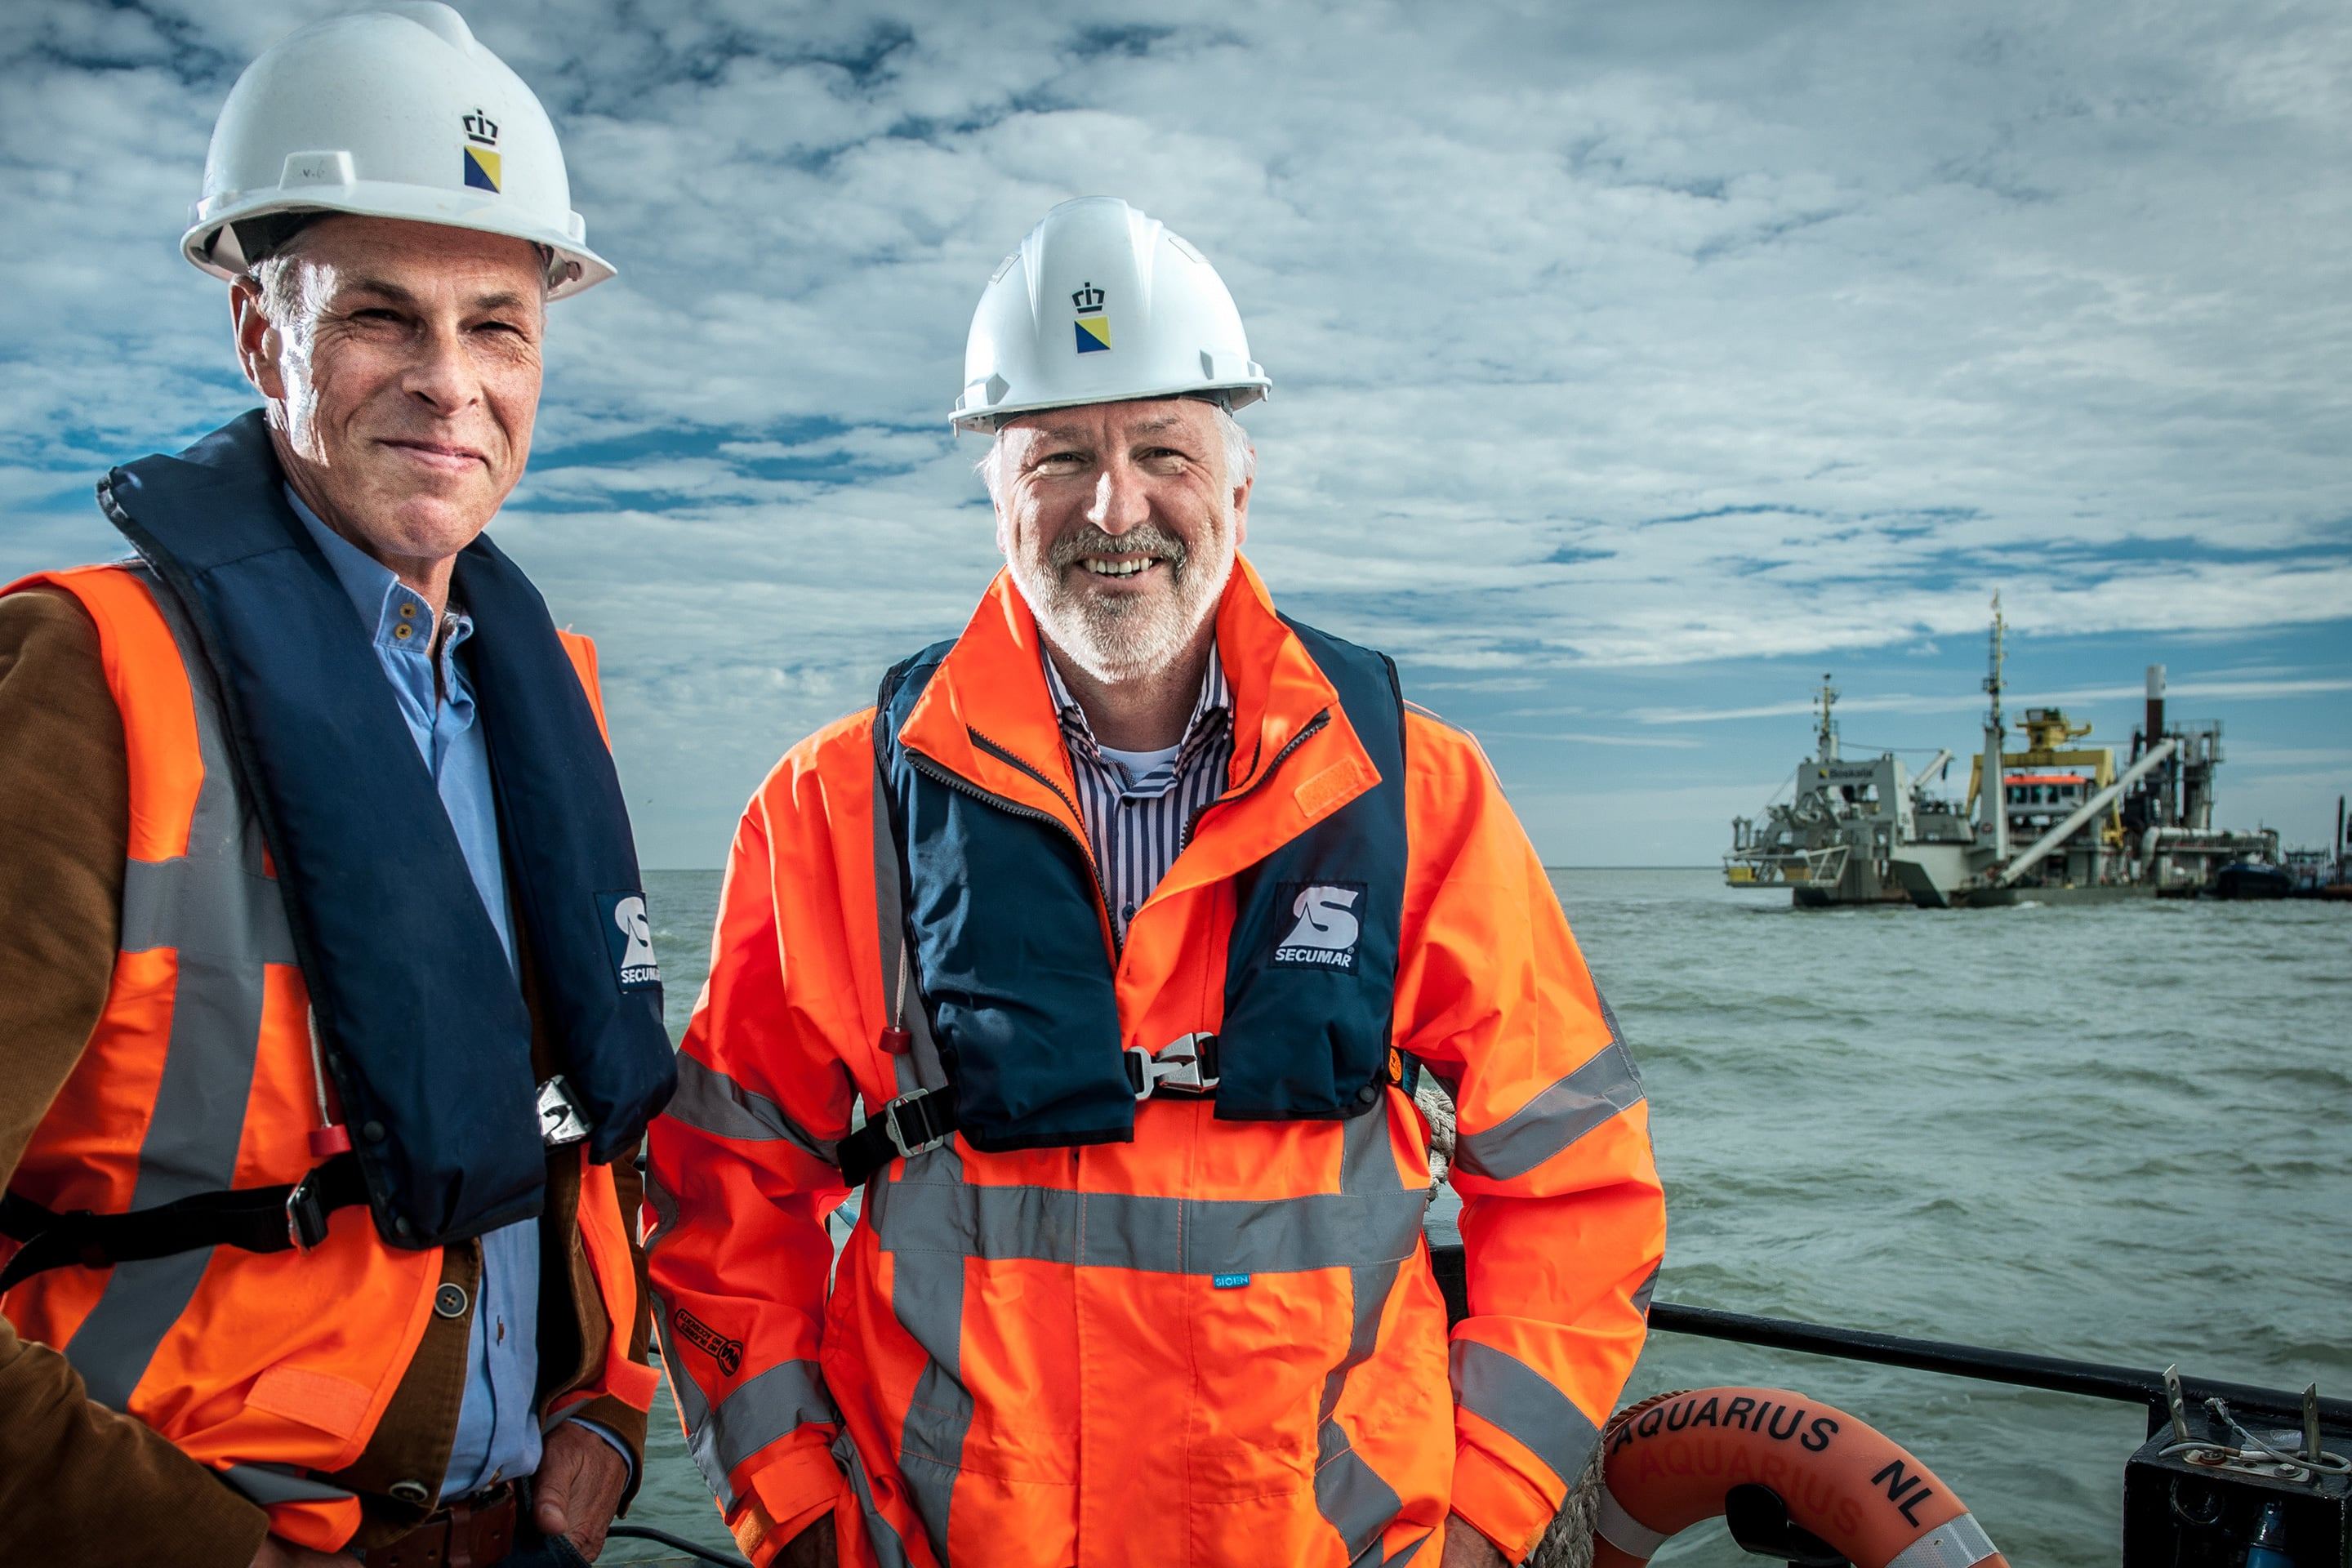 On the left Roel Posthoorn, Project Director of Natuurmonumenten, and on the right Hendrik Postma, Director at Boskalis